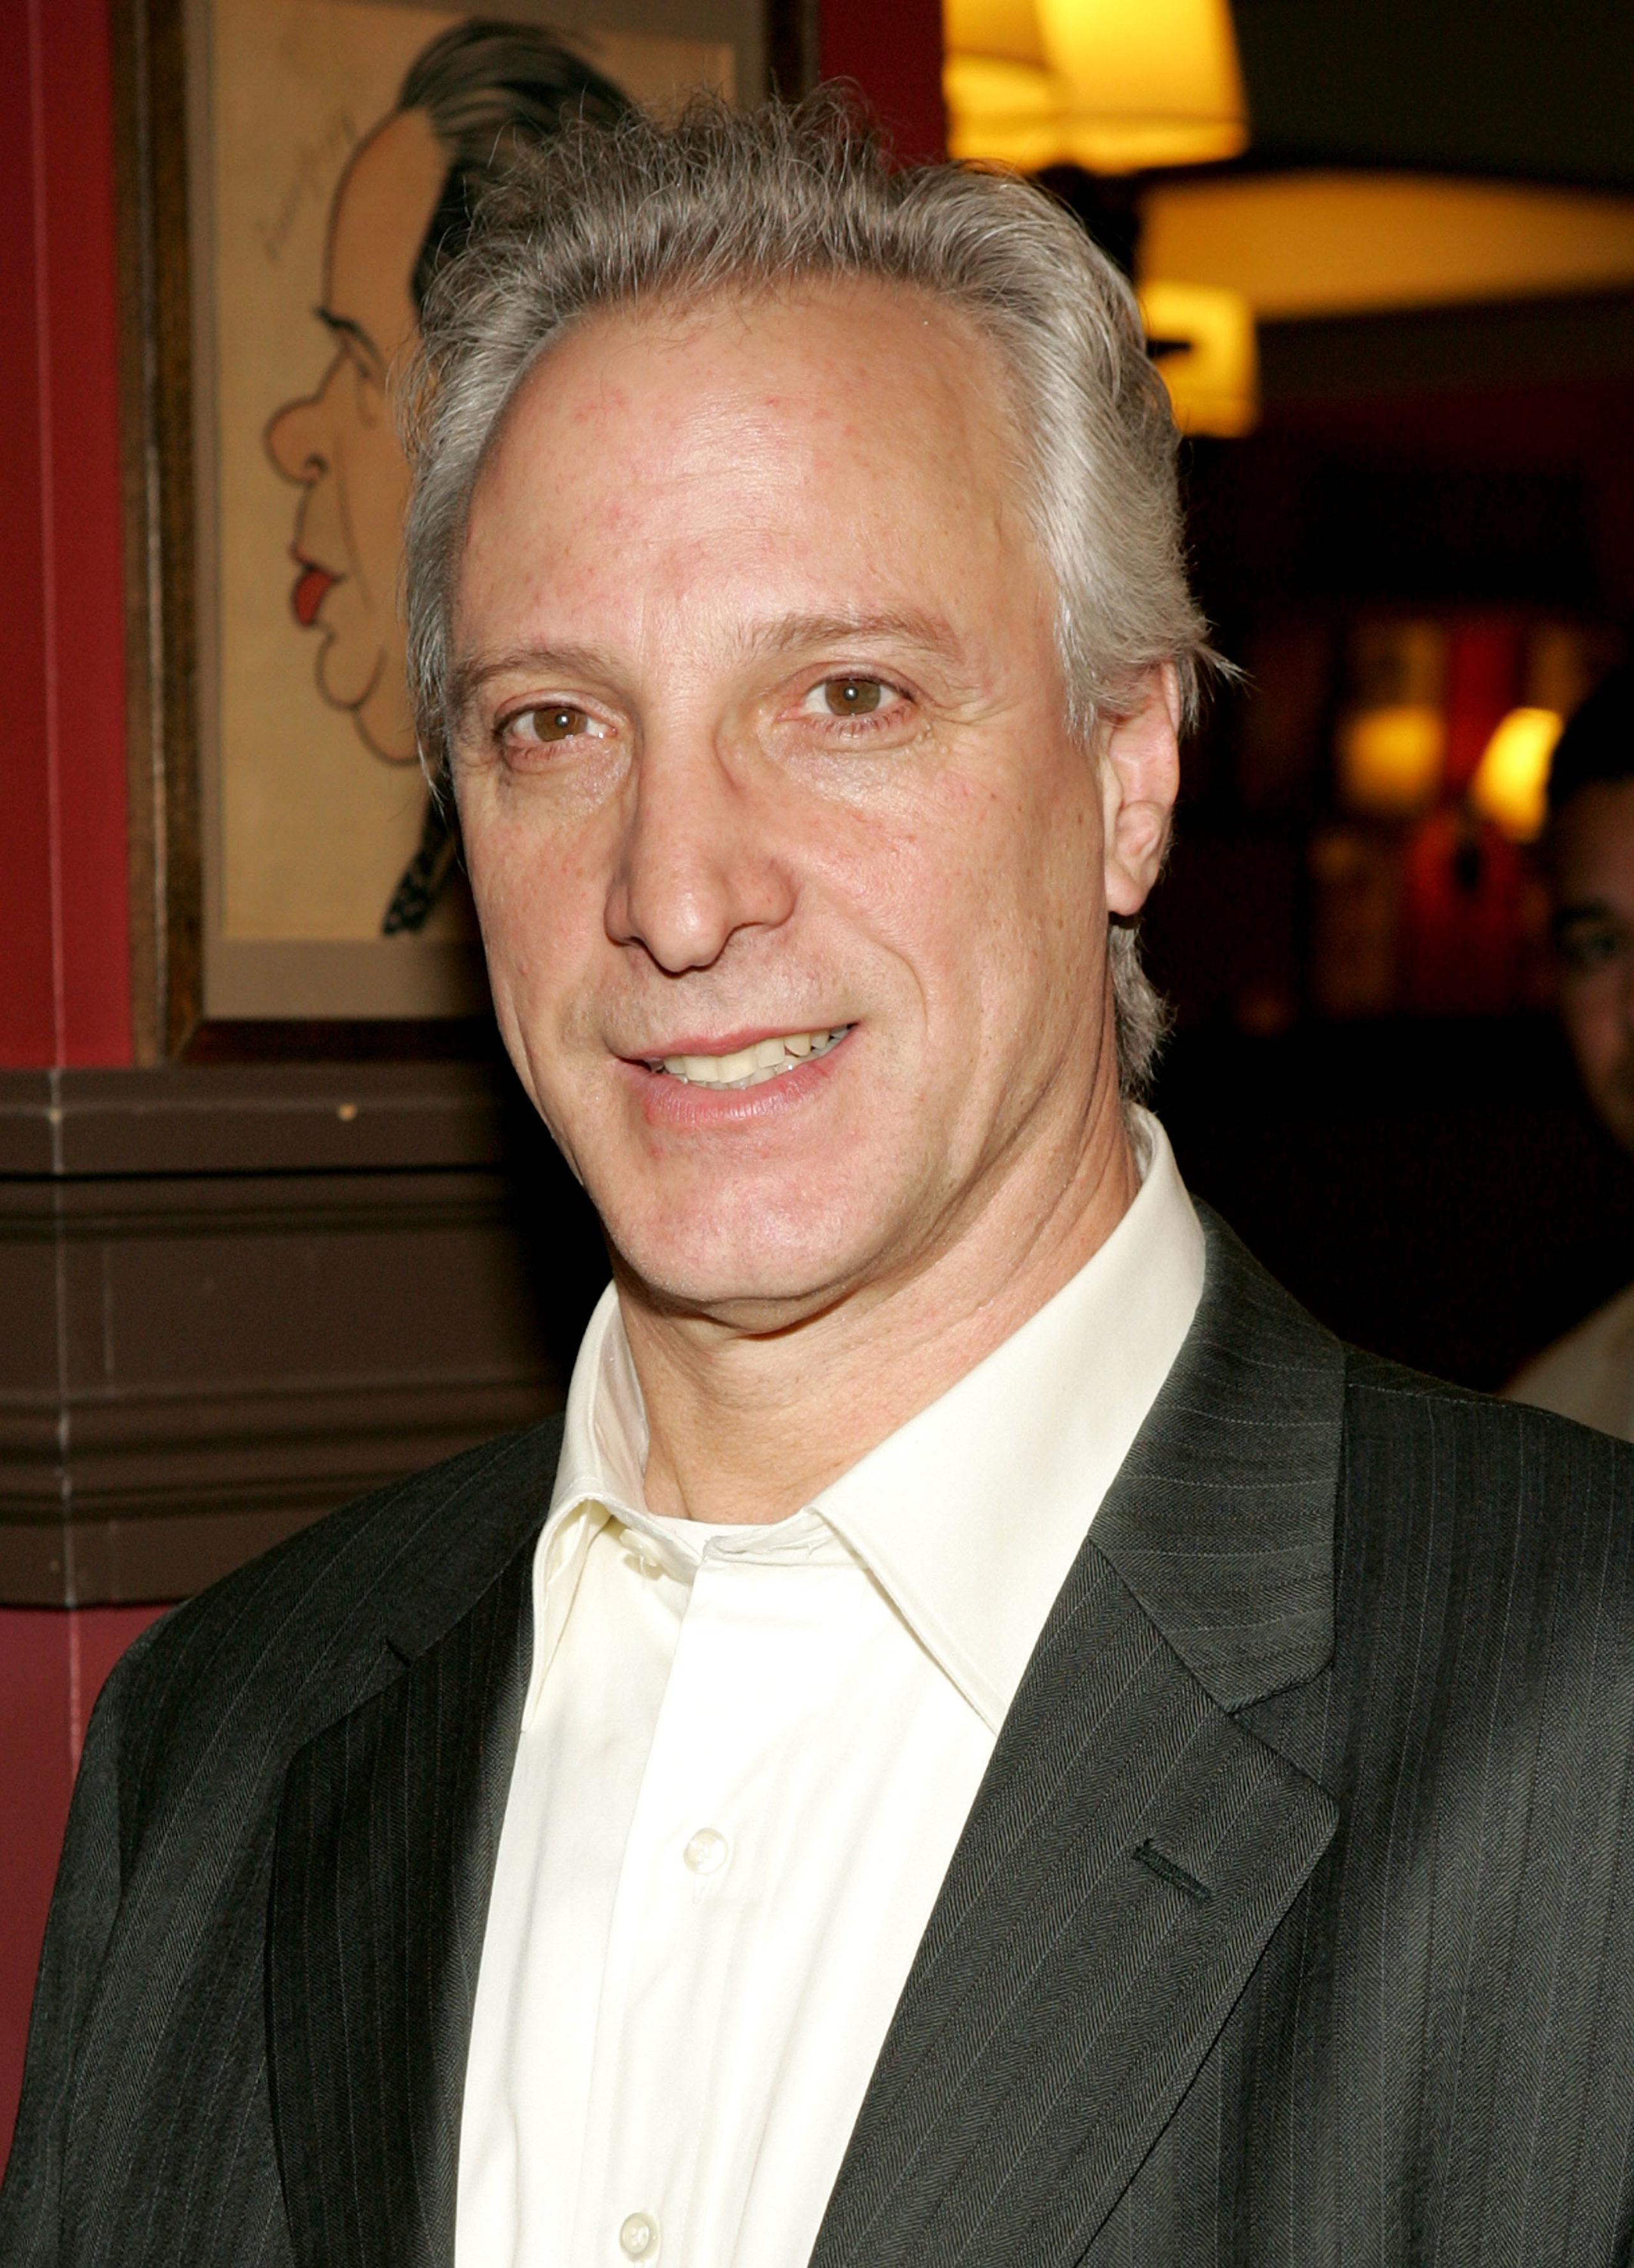 NEW YORK - MAY 26: Producer Robert Lupone attends the Outer Critics Circles Award reception at Sardi's on May 26, 2005 in New York City. (Photo by Paul Hawthorne/Getty Images)